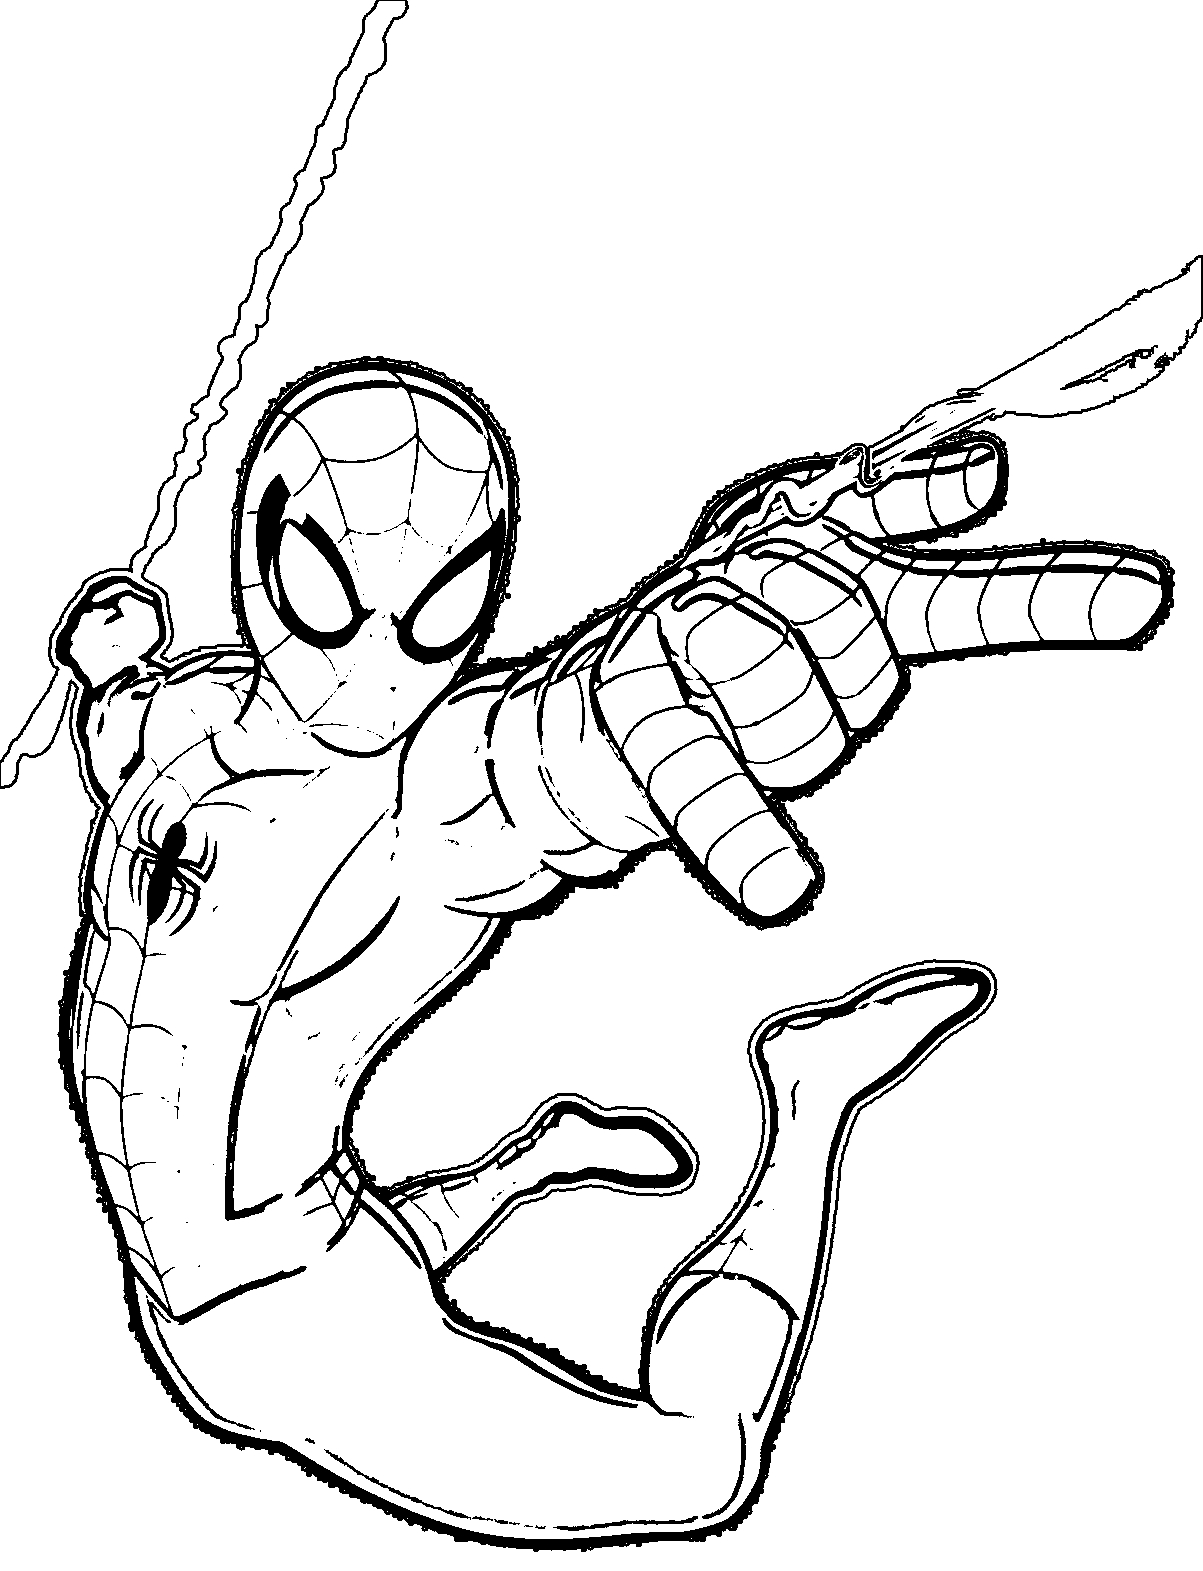 Free Printable Spiderman Coloring Pages Coloring Book Ideas Coloring Book Ideas Spidermanes Free Download